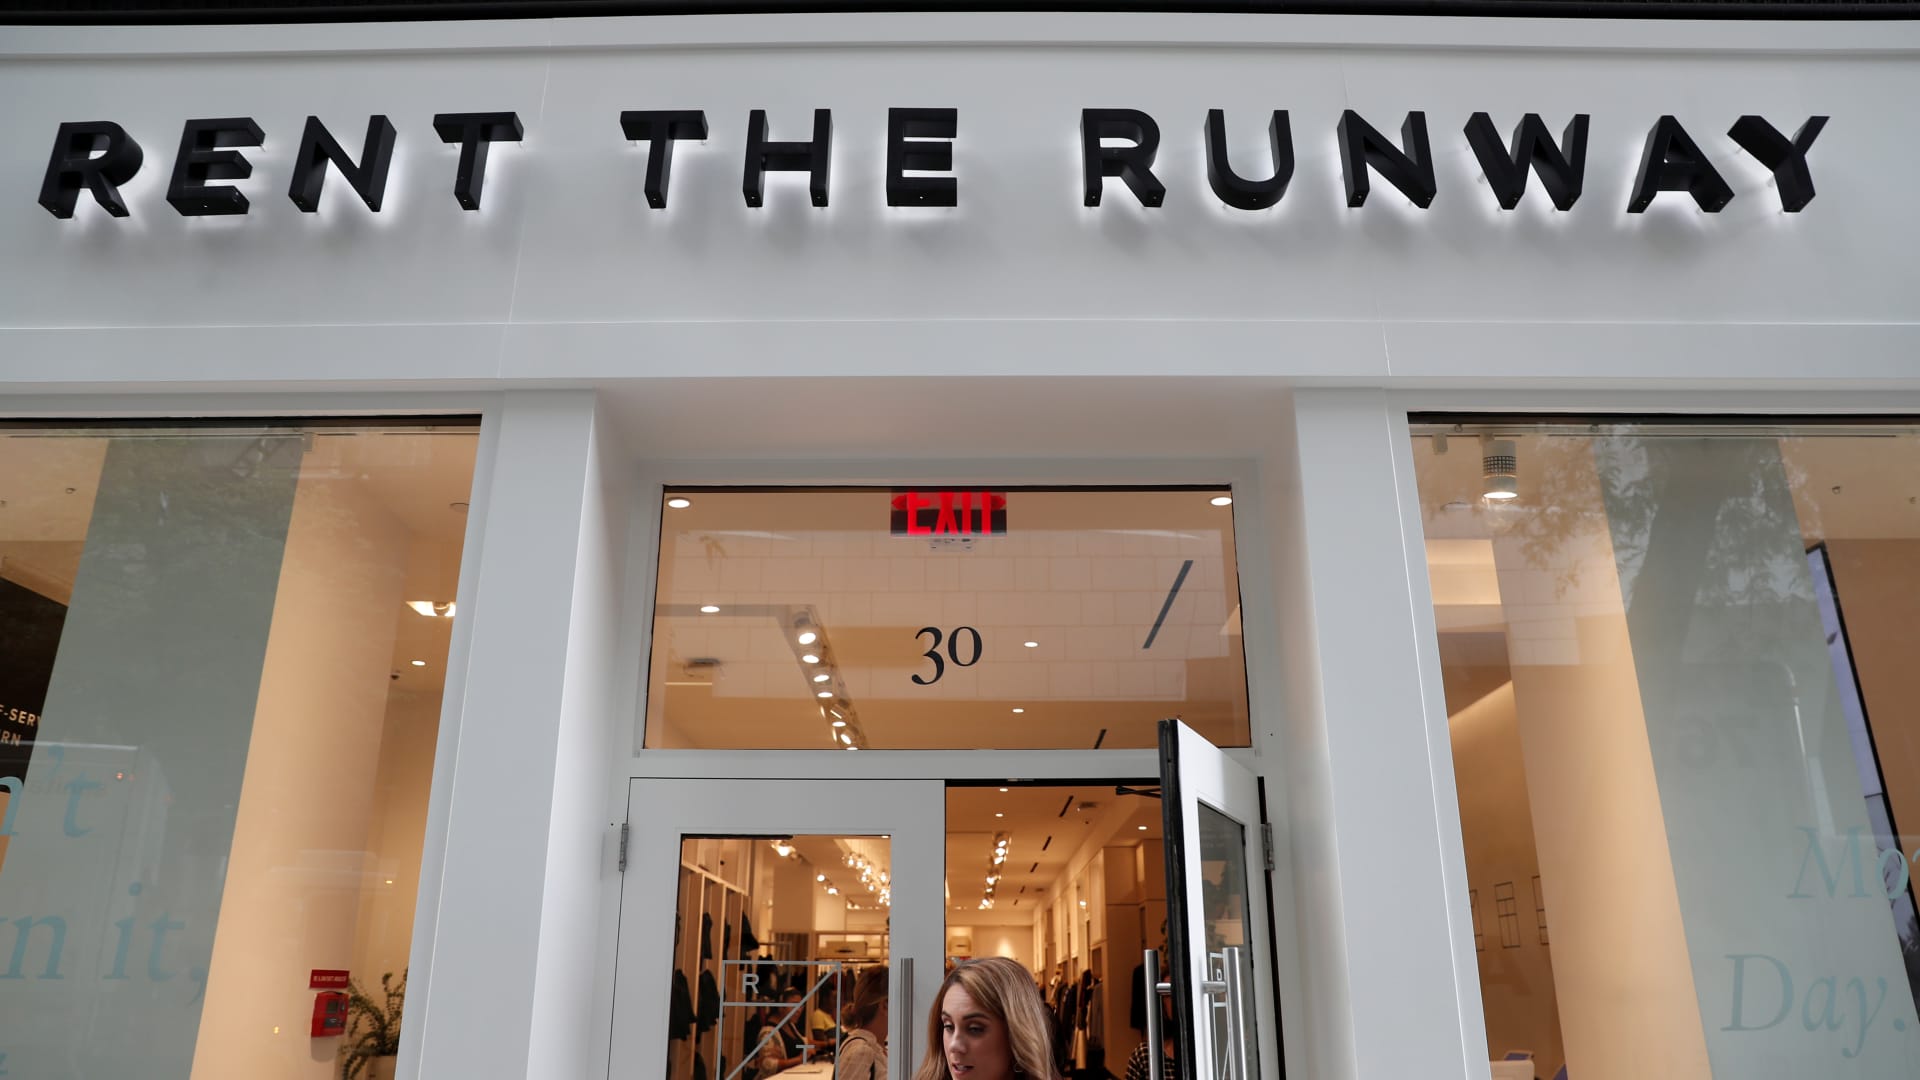 While Rent The Runway closed its retail stores due to the pandemic, it still has a network of drop-off locations in major cities, including New York.